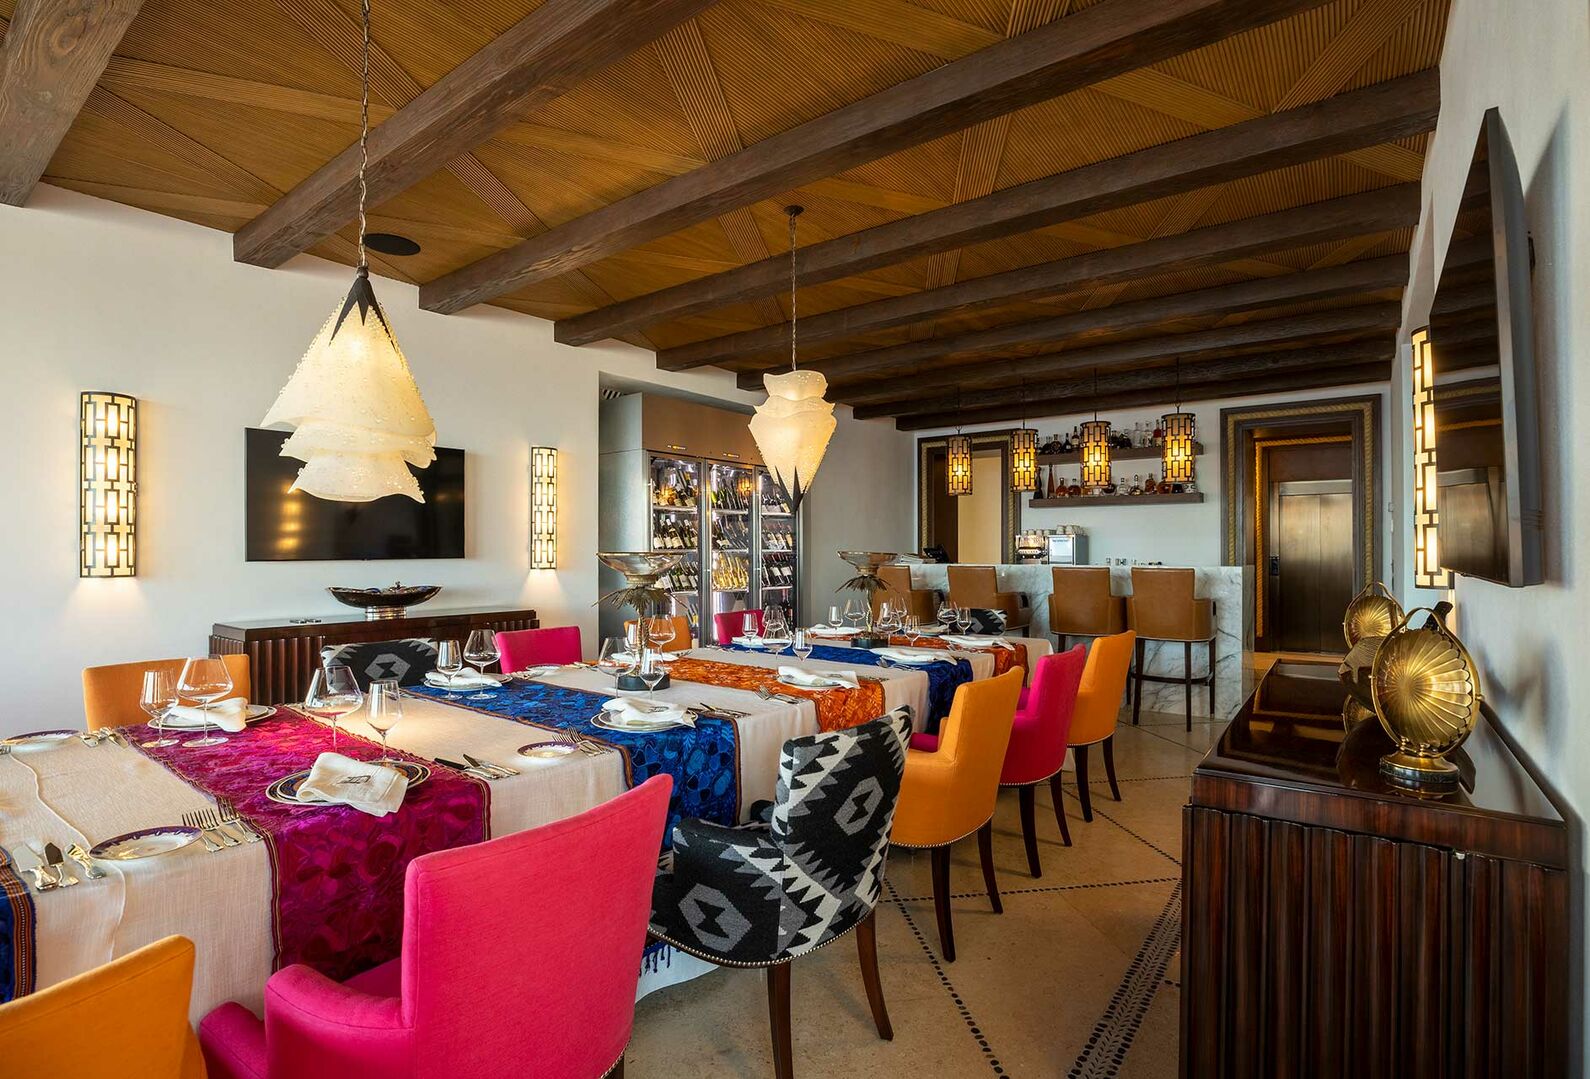 The long table of the dining area of La Datcha is filled with colorful chairs and a wall-mounted TV.